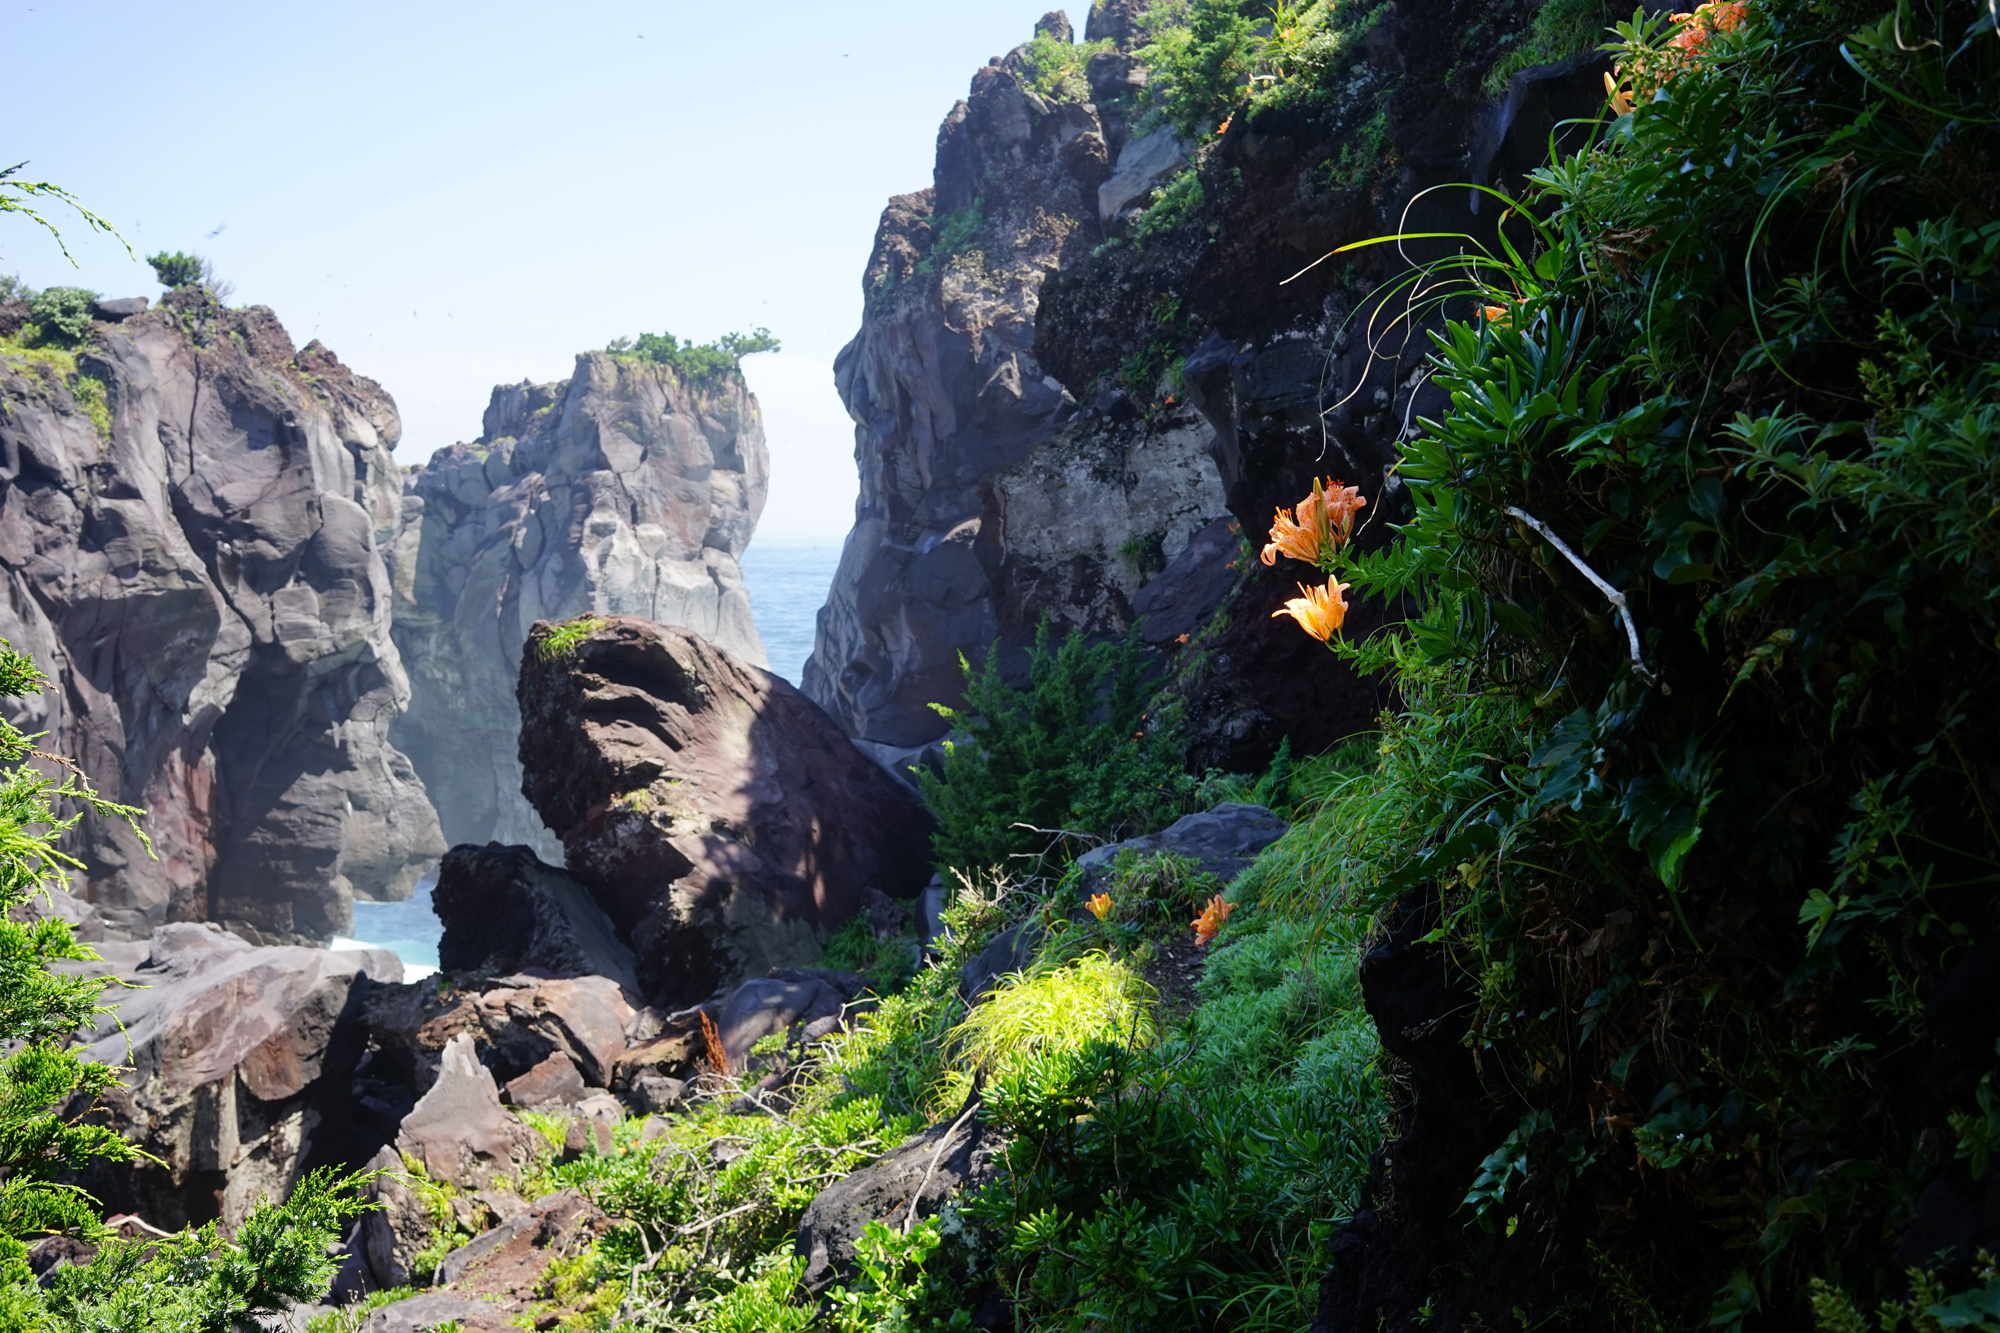 Natural bounty: Flowers cling to the lush, verdant hillside along the jagged cliffs of the Jogasaki Coast. | ANDREW CURRY